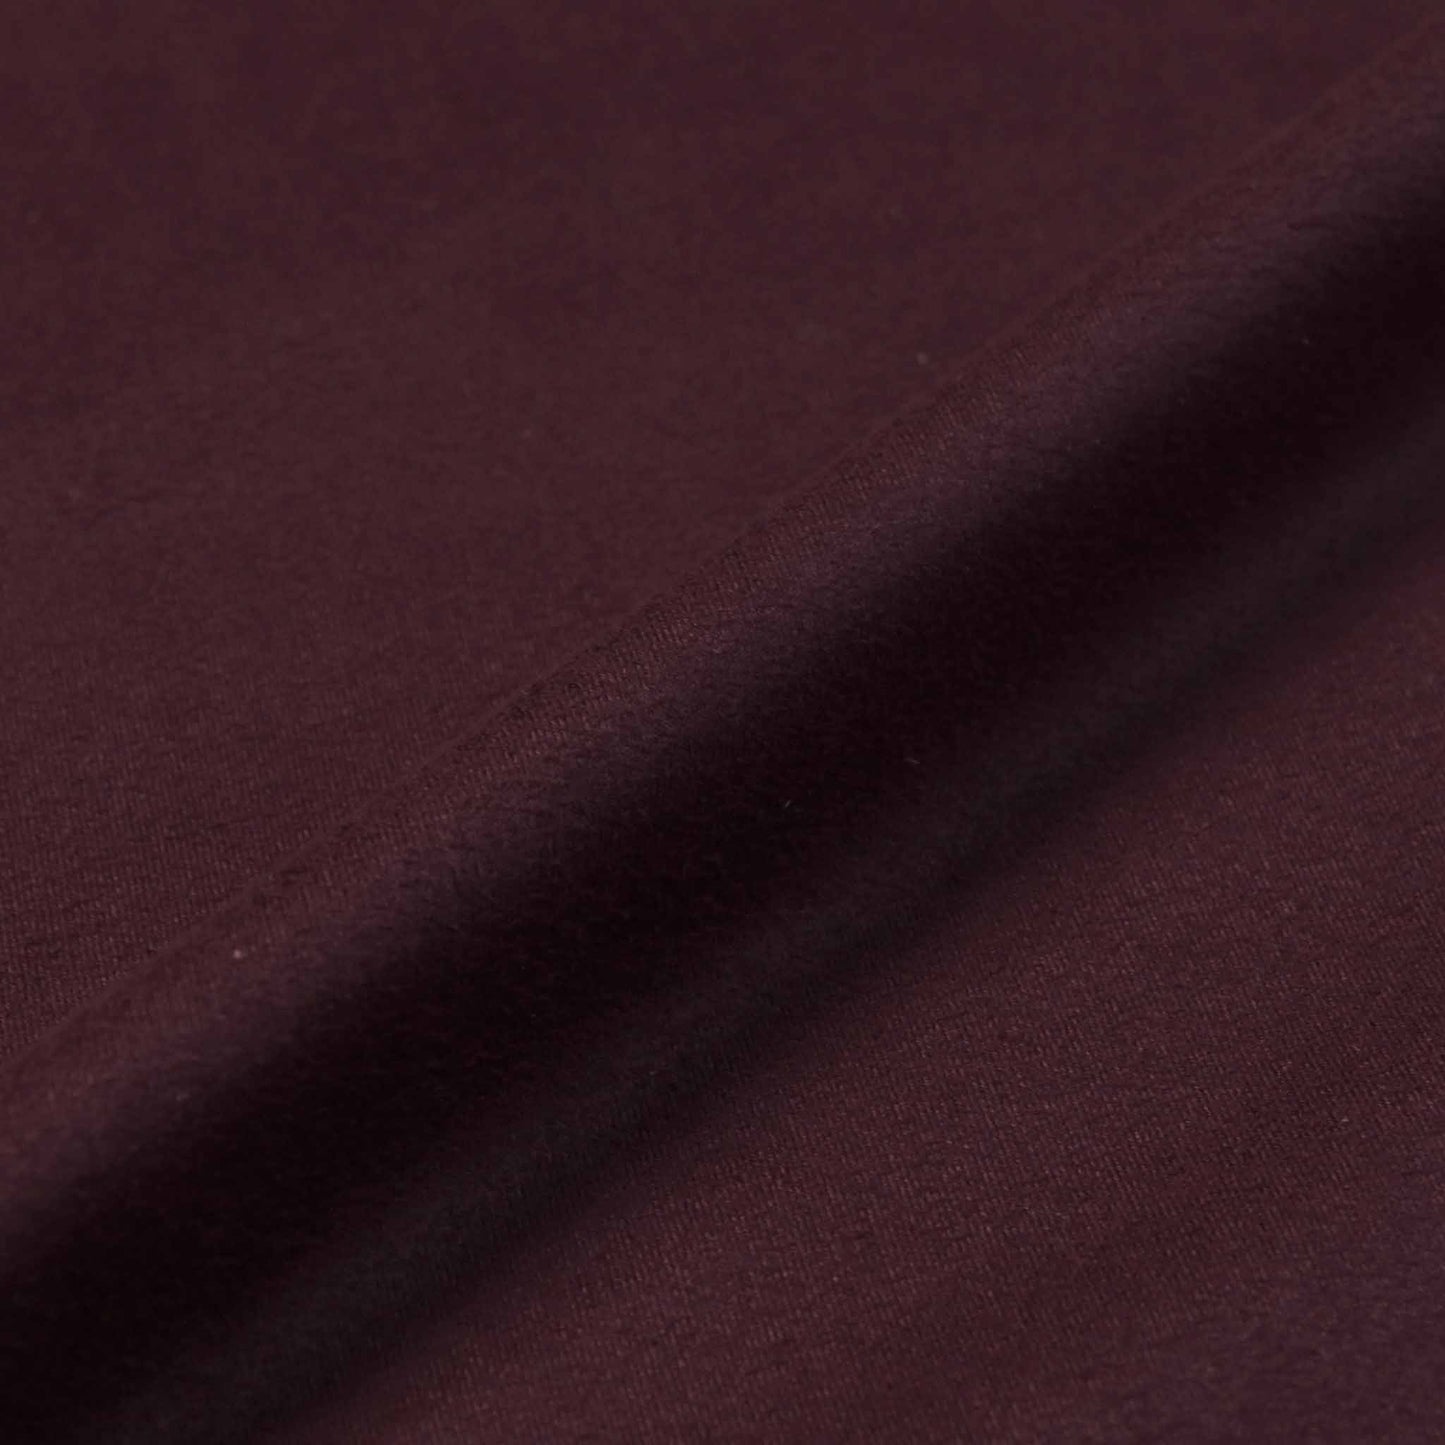 stretchy suedette dressmaking fabric in plum purple colour